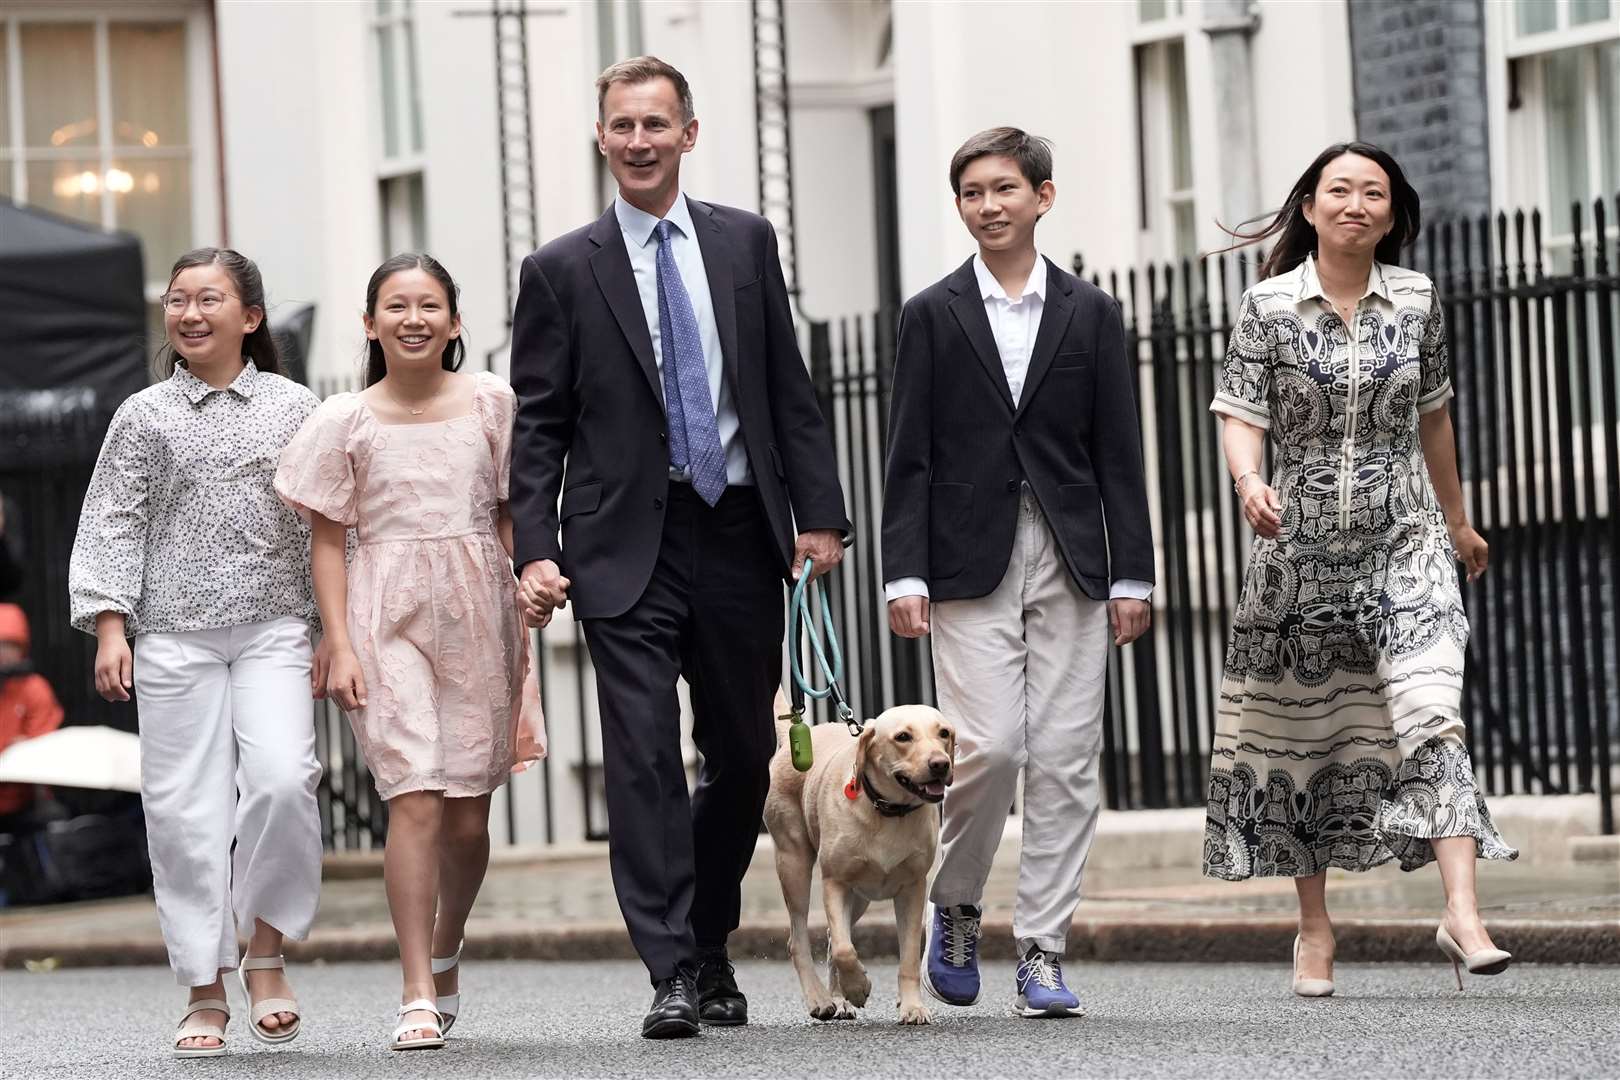 Outgoing Conservative chancellor of the exchequer Jeremy Hunt, with his wife Lucia and their children Jack, Anna and Eleanor, leaves 11 Downing Street (Stefan Rousseau/PA)